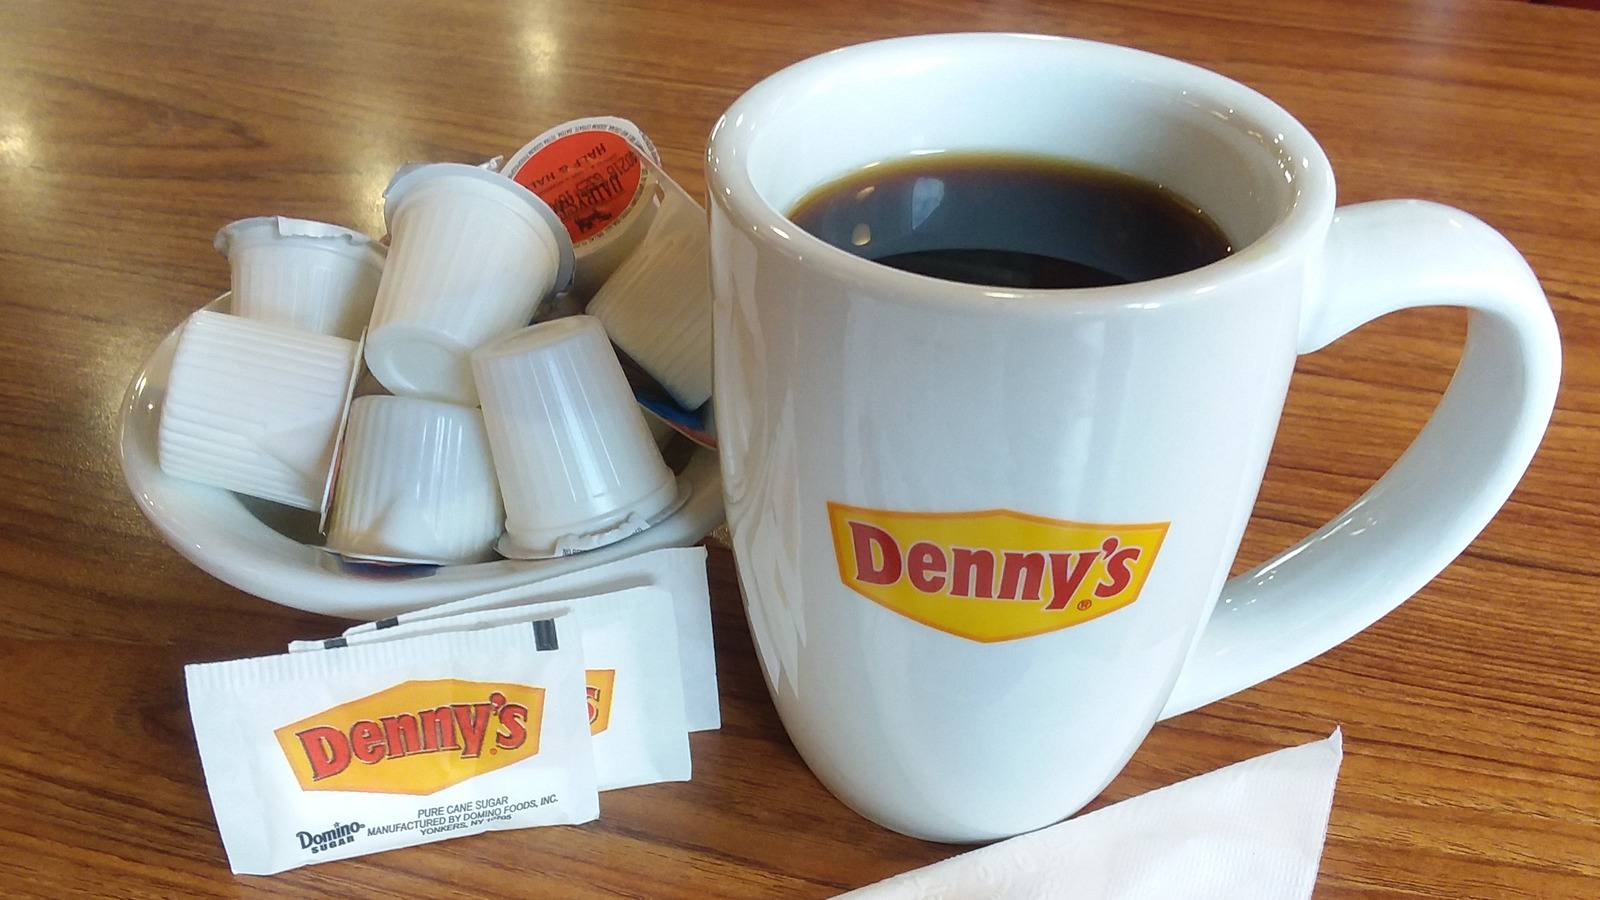 Is Denny's Open On Christmas 2021?